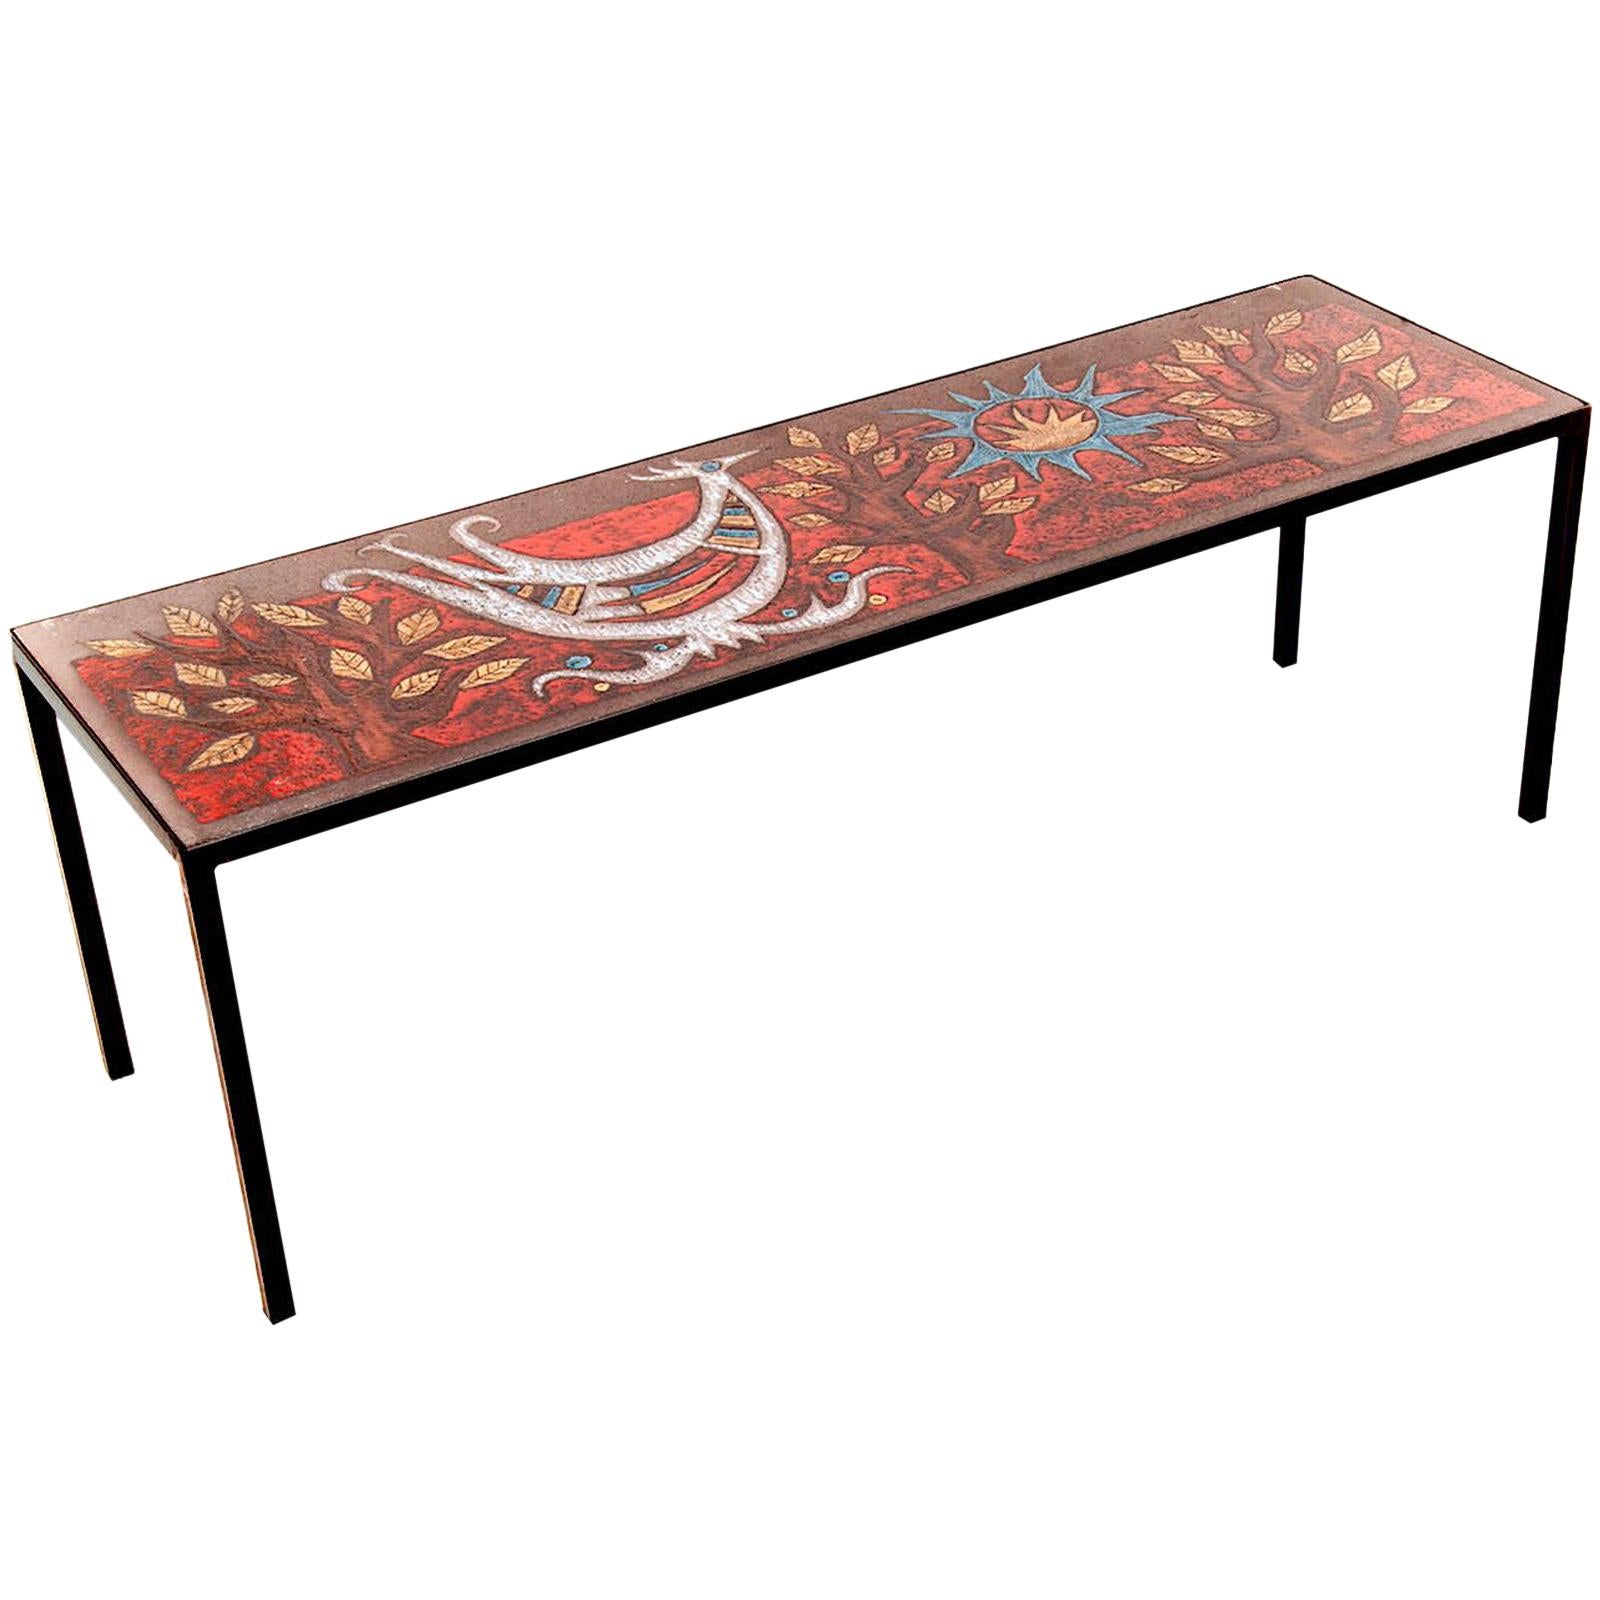 Ceramic French Riviera Vallauris Coffe Table by Jean Jaffeux on Java Panel, 1960